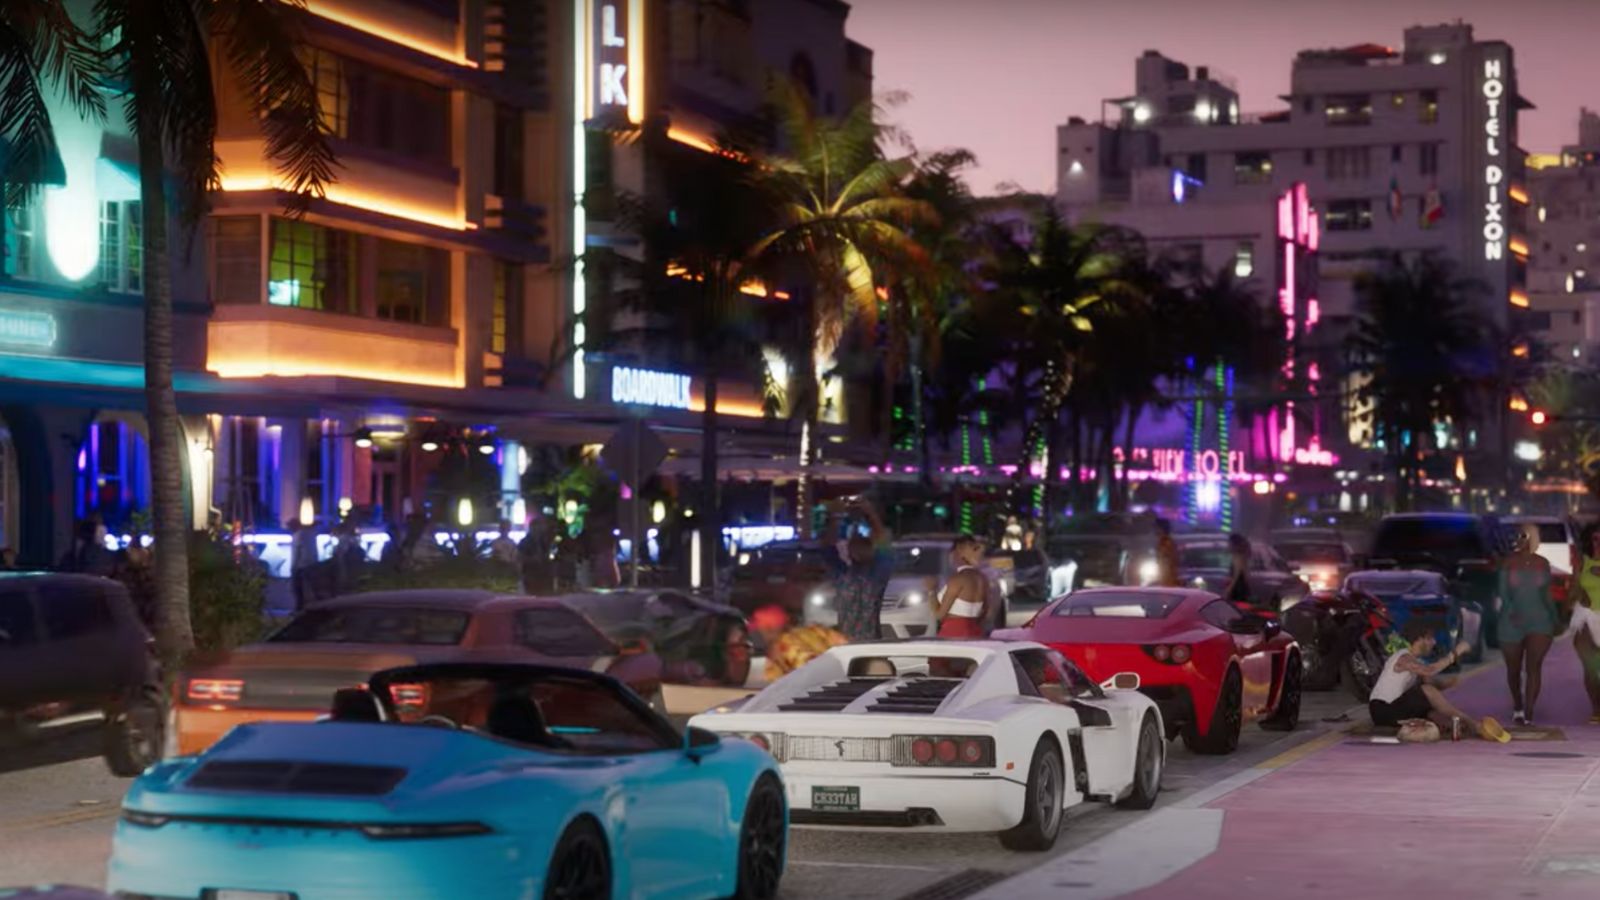 The Day Before devs under fire after being accused of copying GTA 5 trailer  script - Dexerto